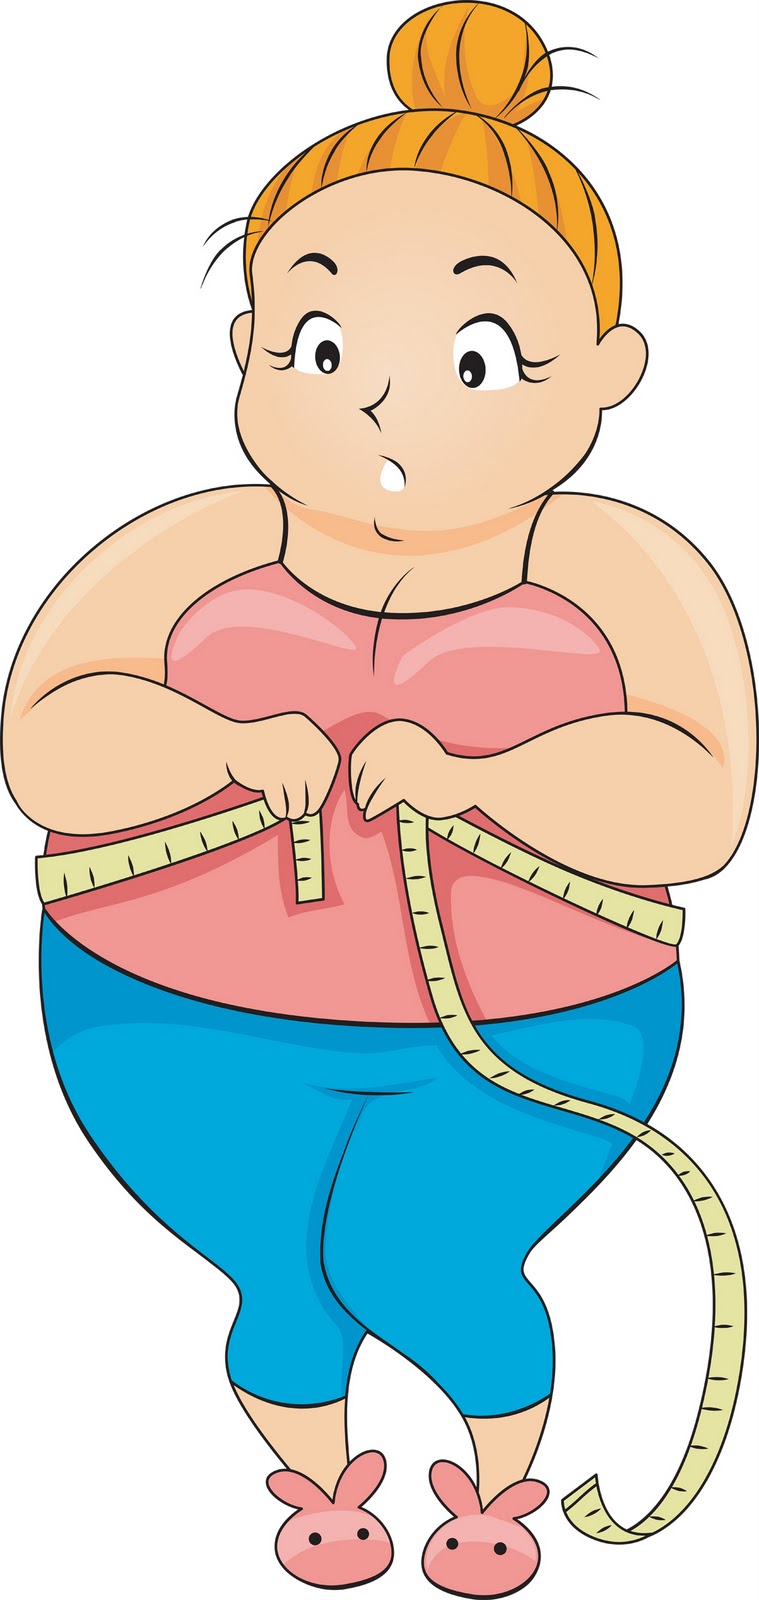 free clipart images weight loss - photo #1